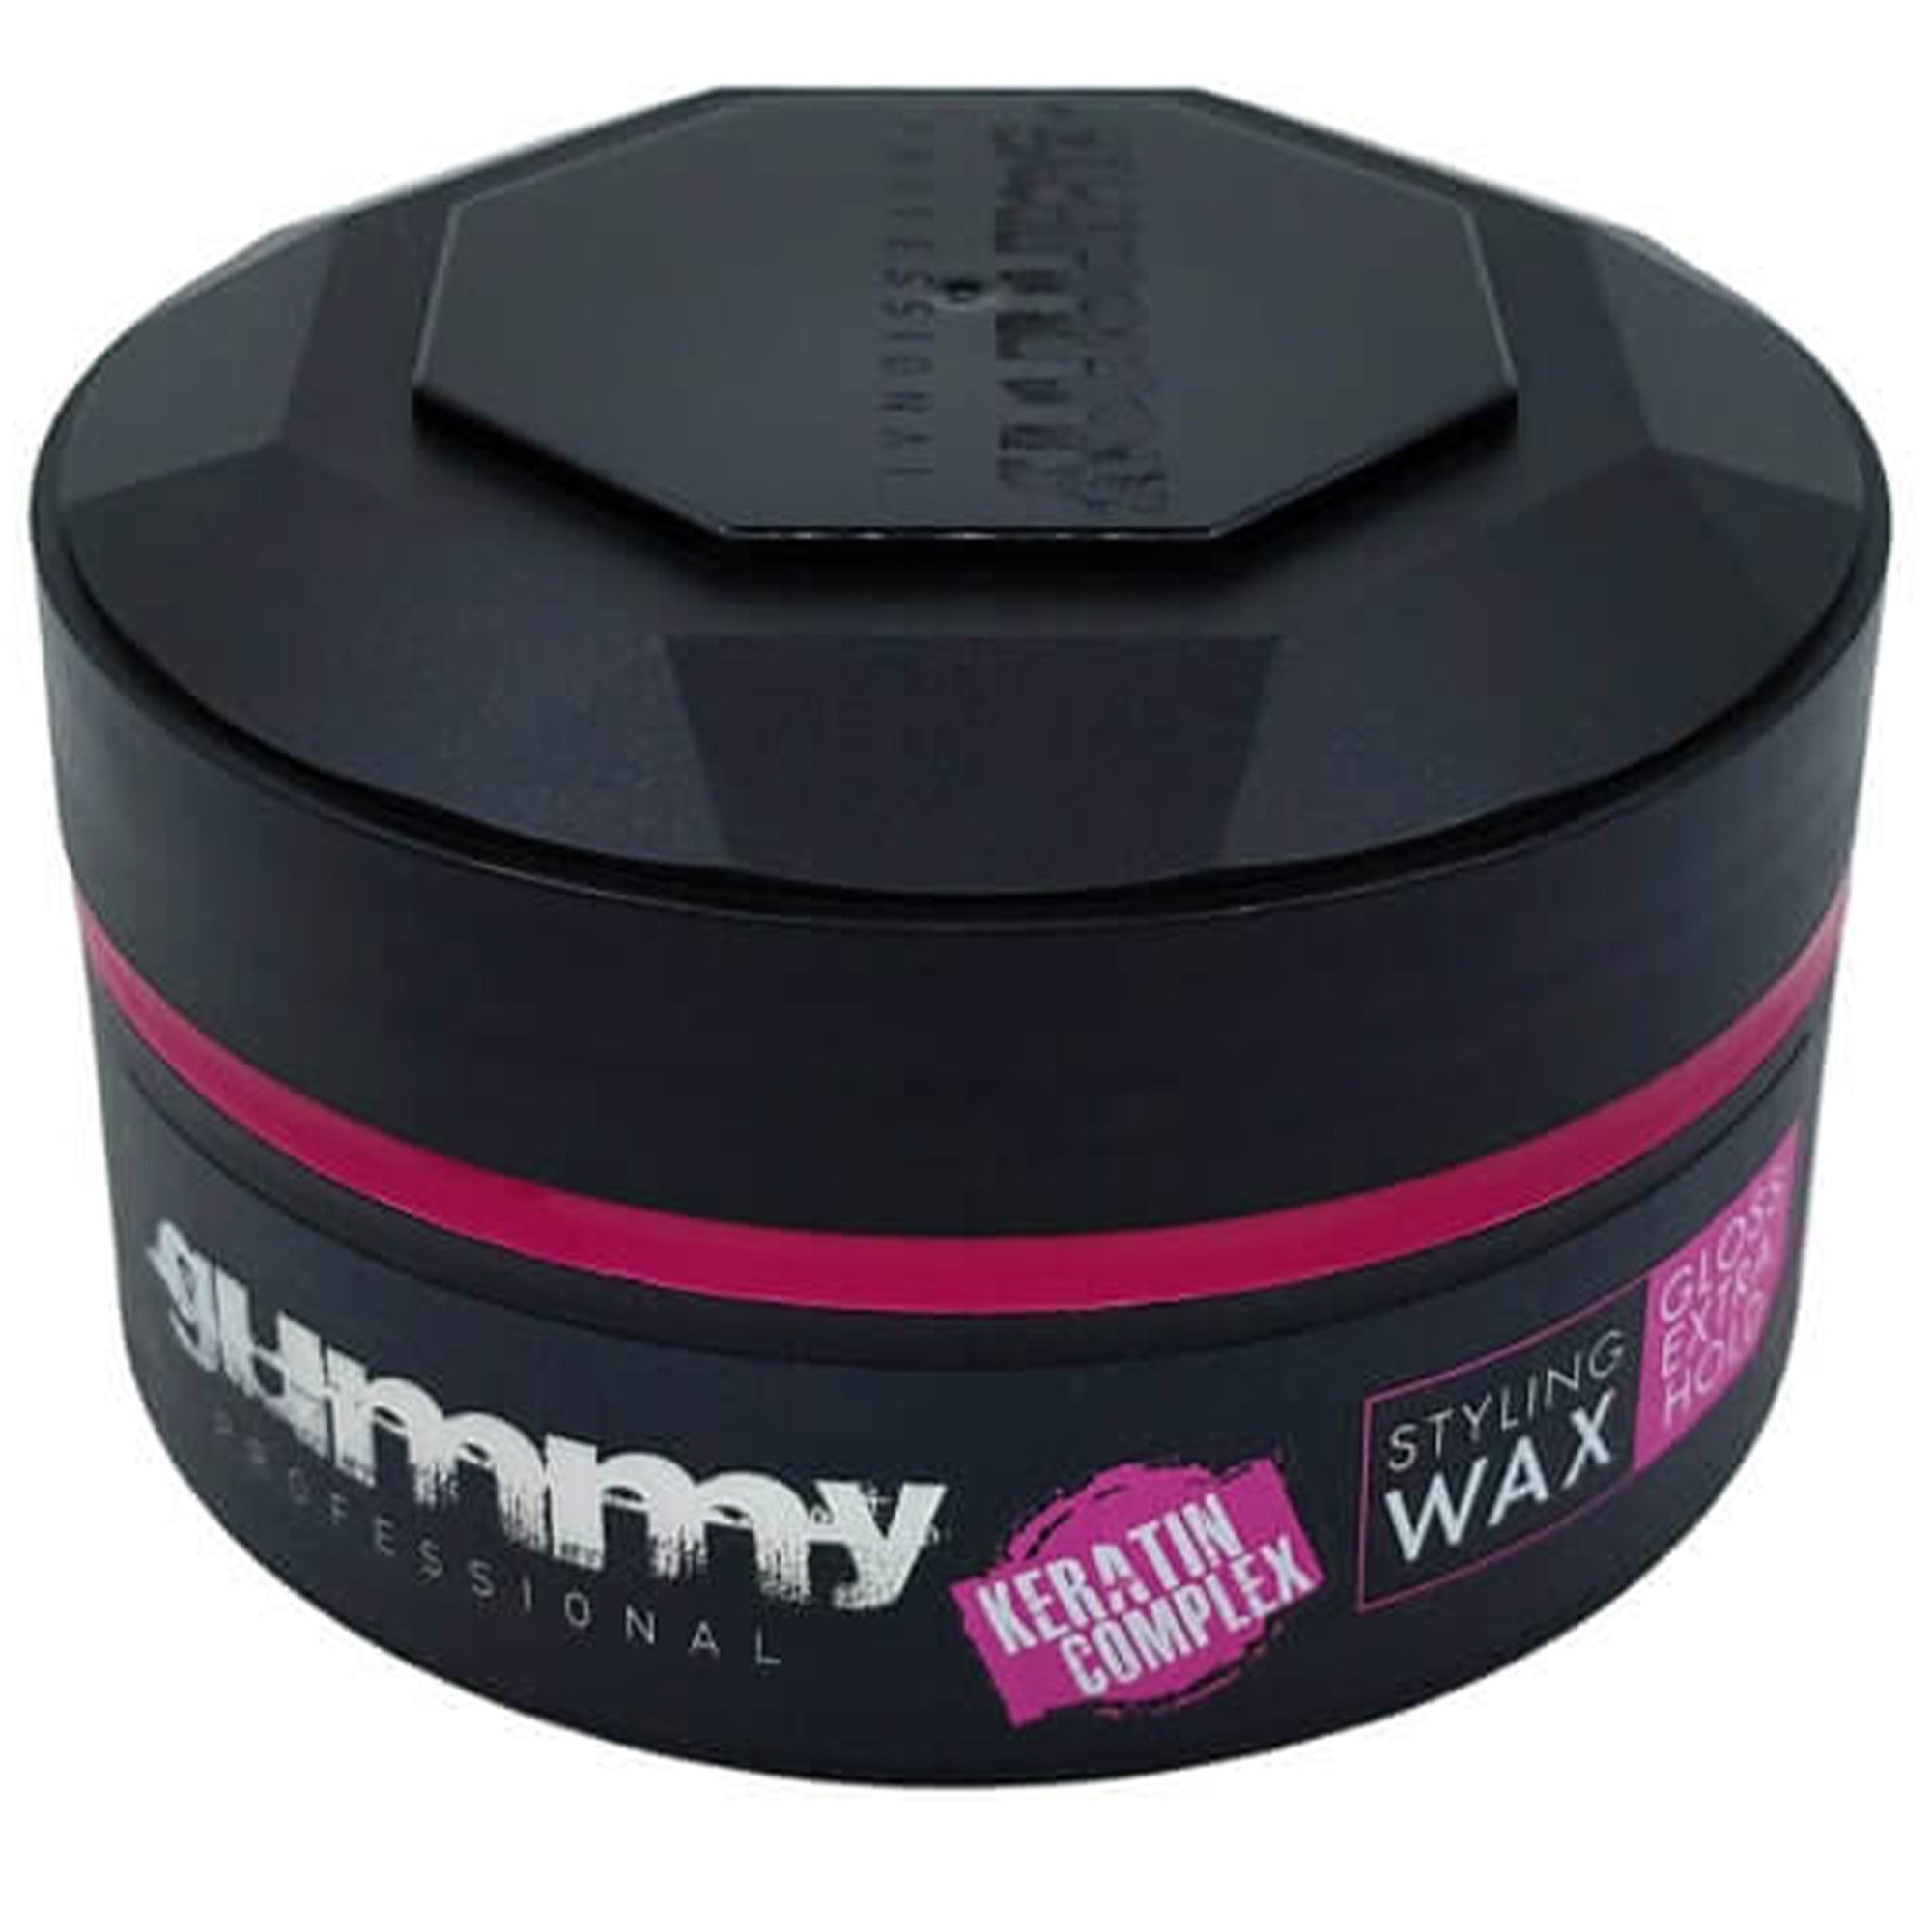 Gummy - Styling Wax Gloss Extra Hold 150ml